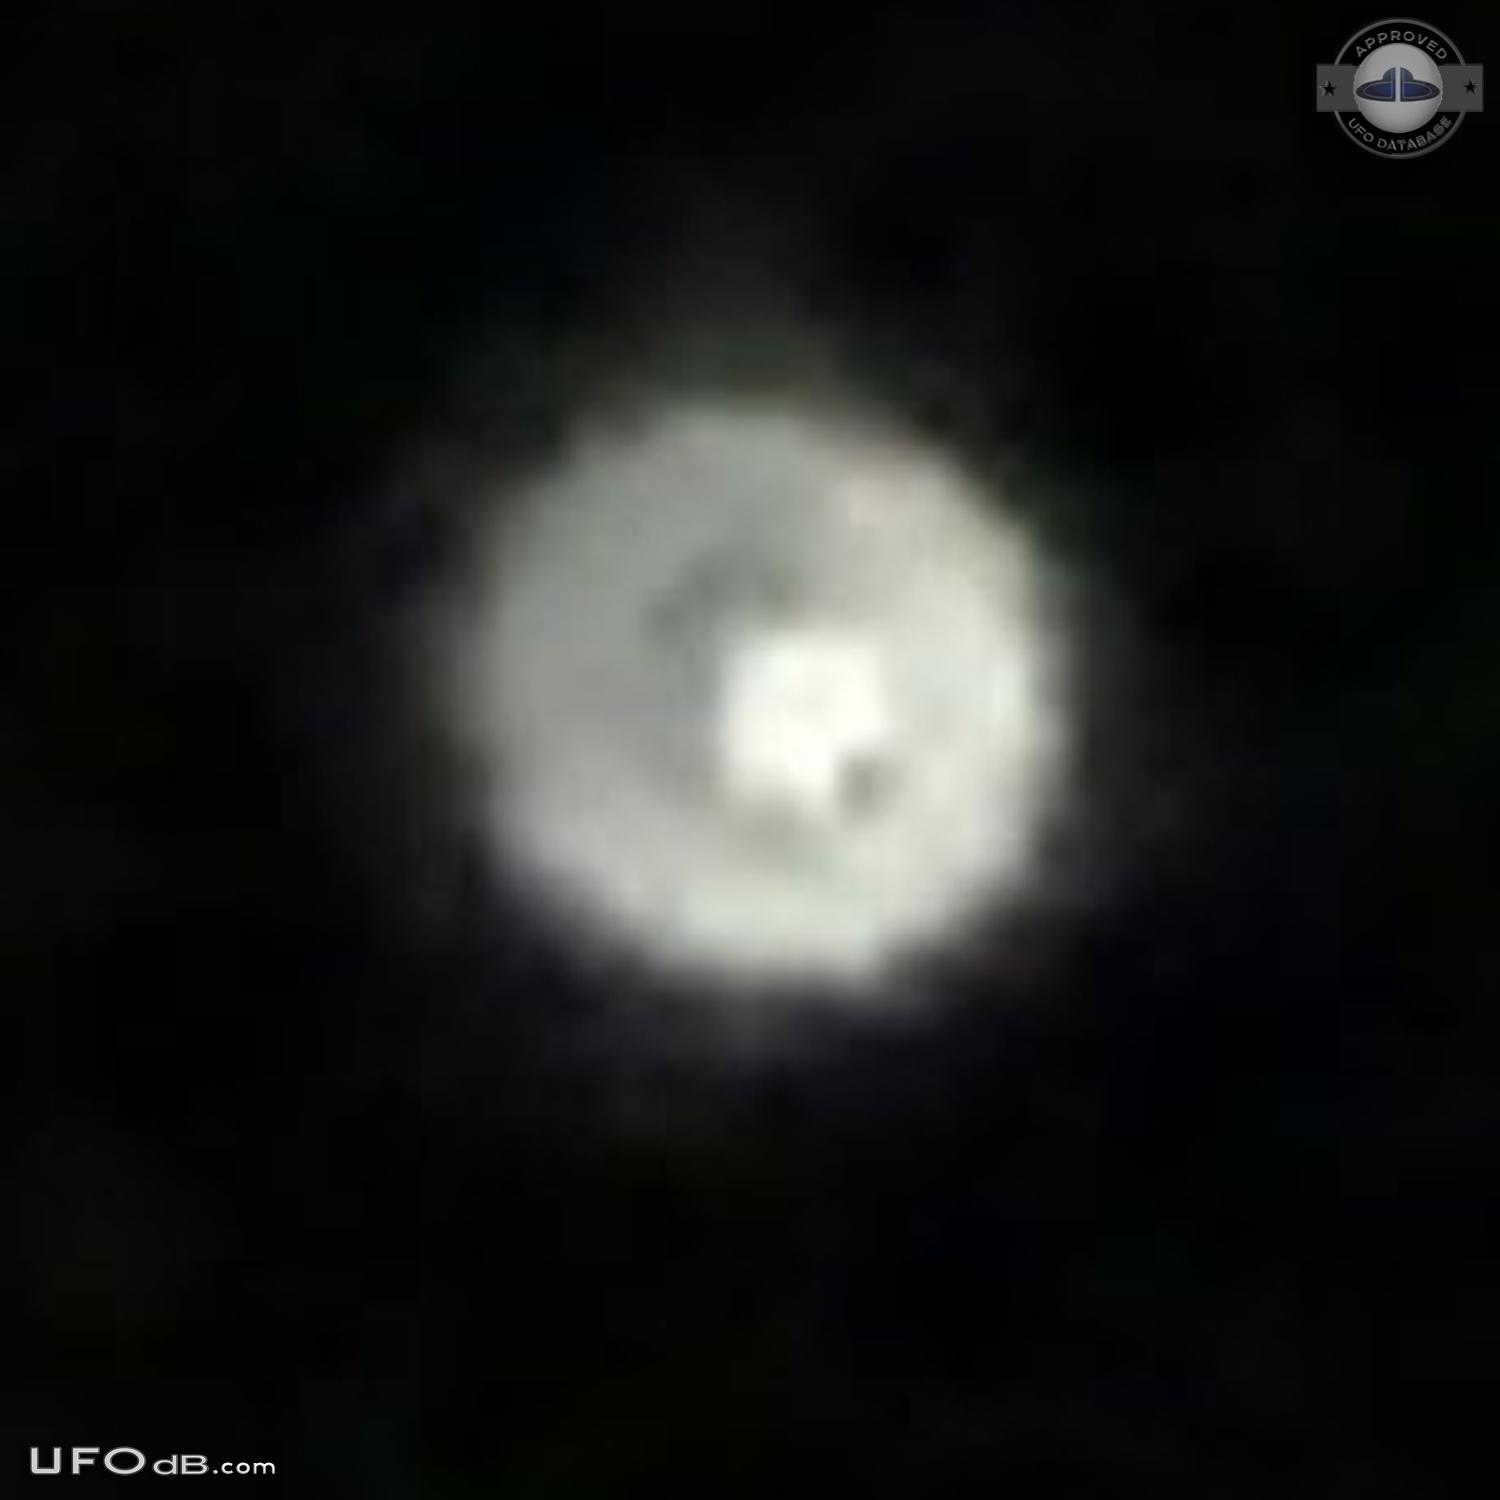 Big bright light in the sky was bigger than any star I have ever seen UFO Picture #576-3